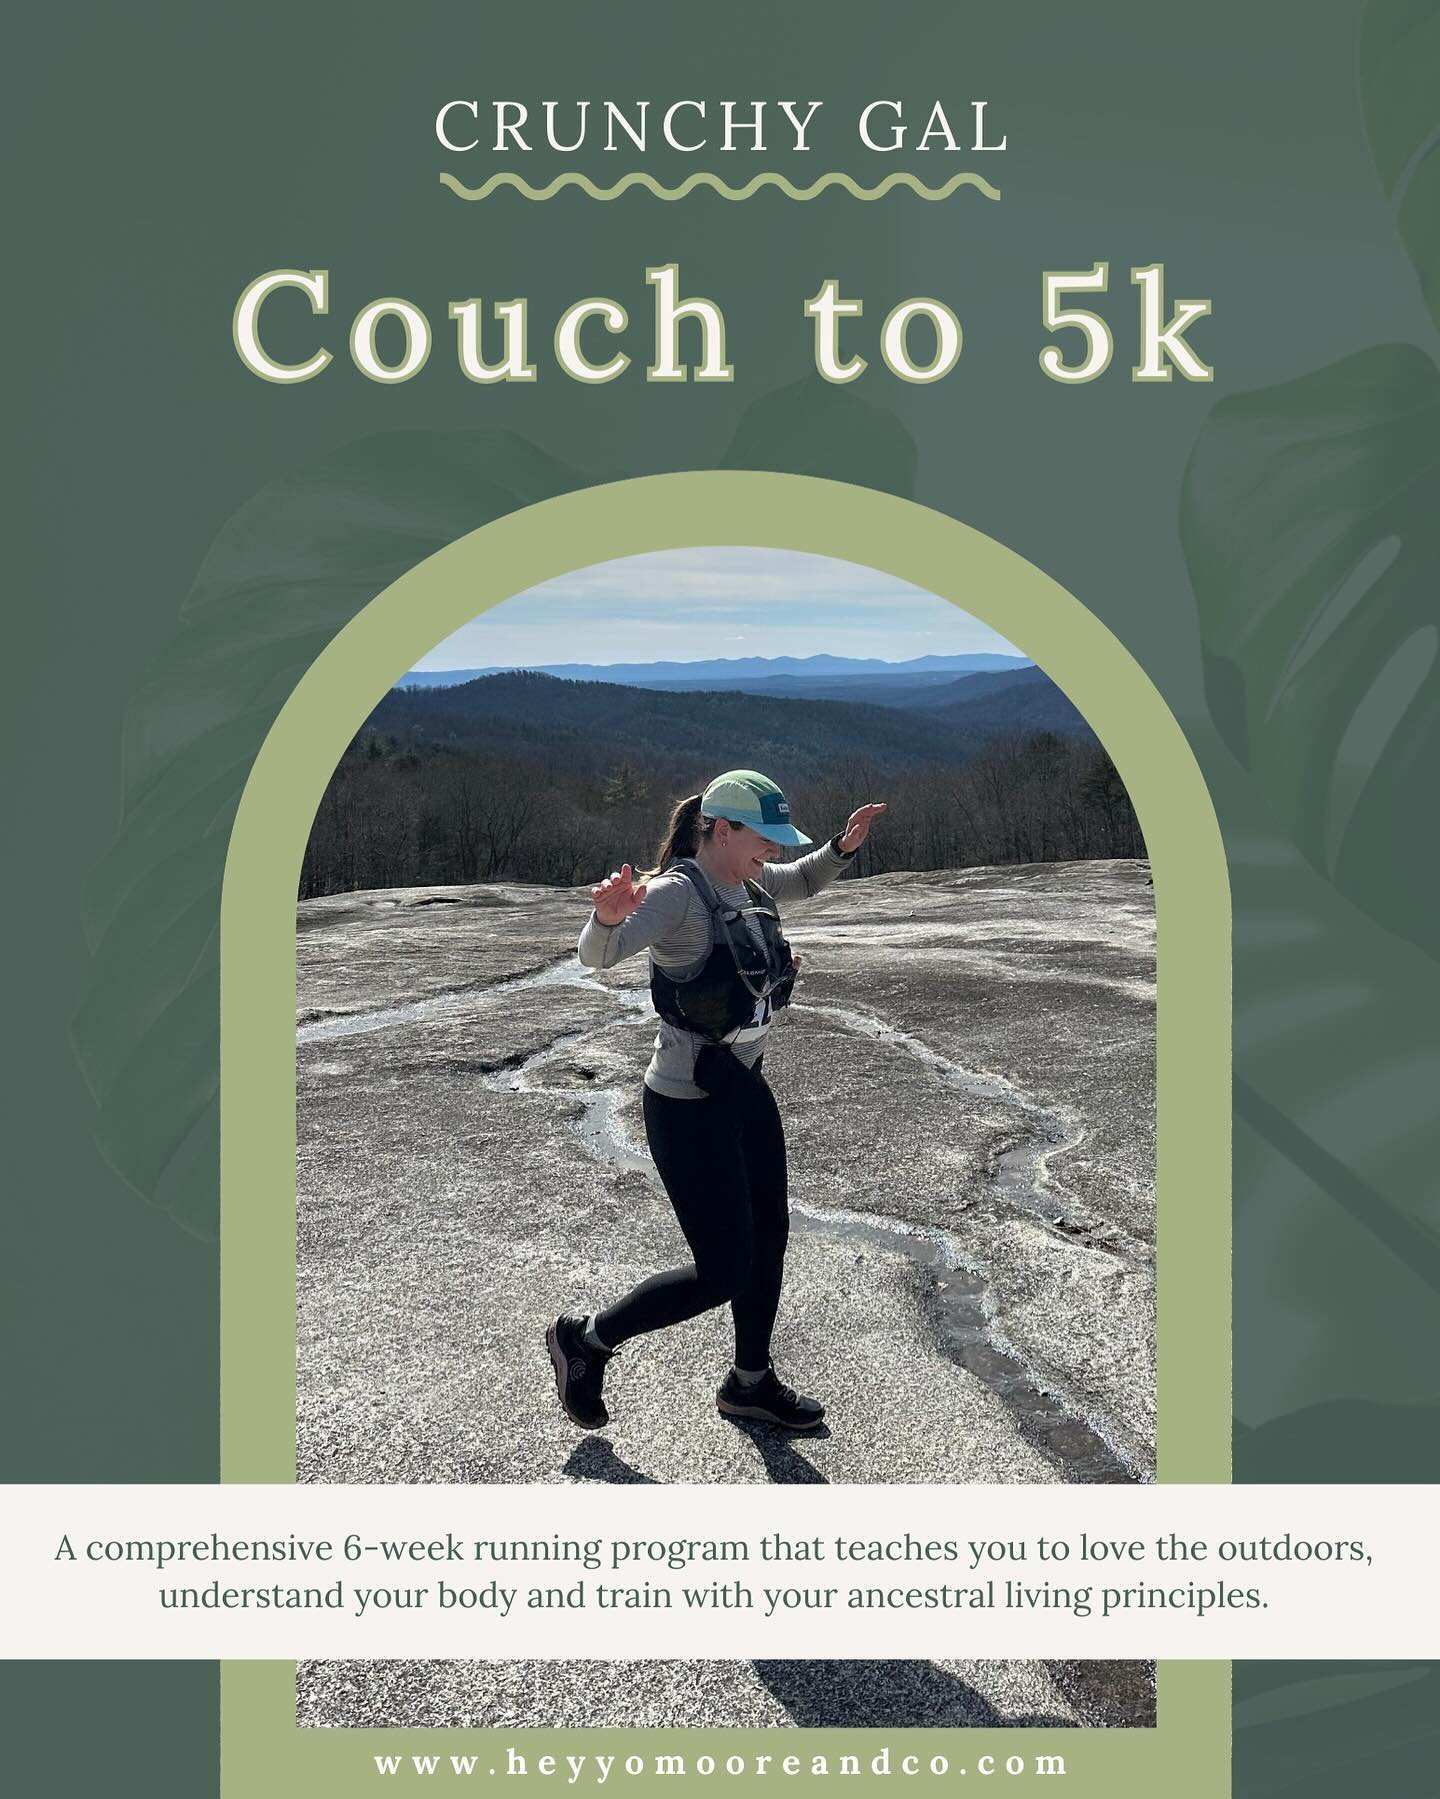 Crunchy Gal Couch to 5k kicks off with my workout members TOMORROW! Monday, April 15 🏃&zwj;♀️ 

but you still have the chance to join just the run challenge by April 23 by purchasing my Crunchy Gal Couch to 5k eBook on my website! 📖 

CRUNCHY- more